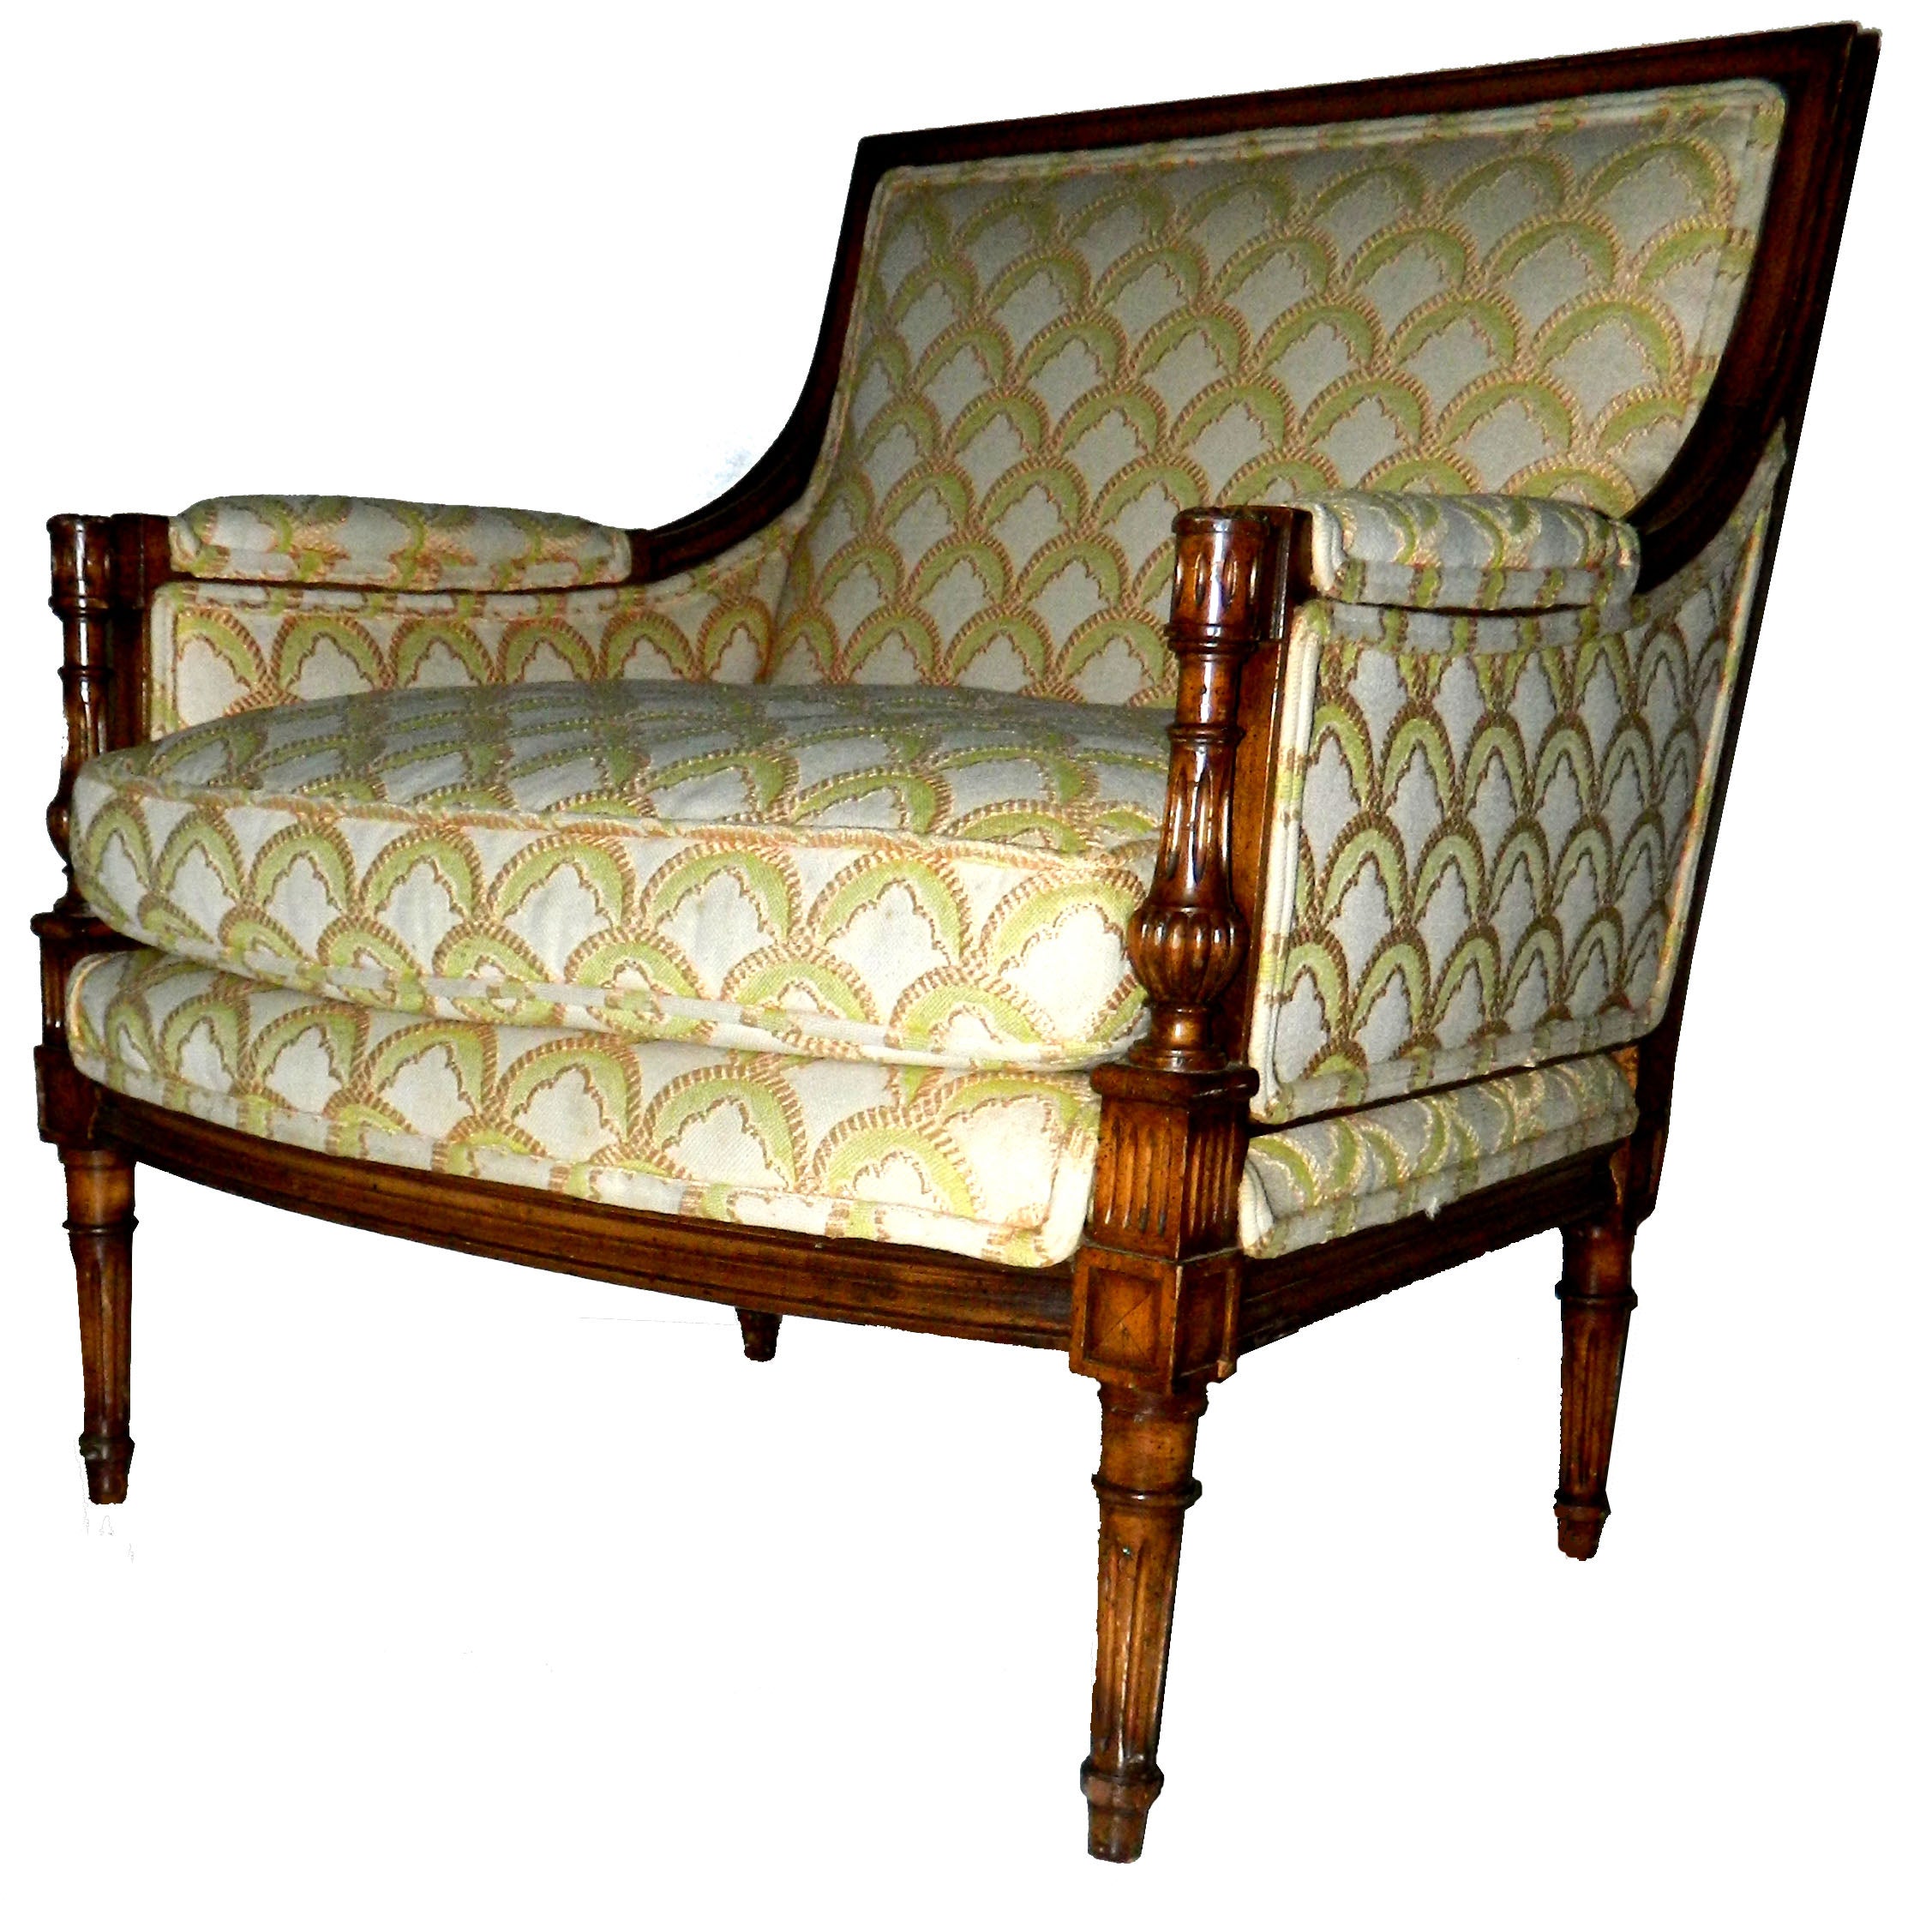 SATURDAY SALE. Rare and Huge Bergere by Maison Jansen